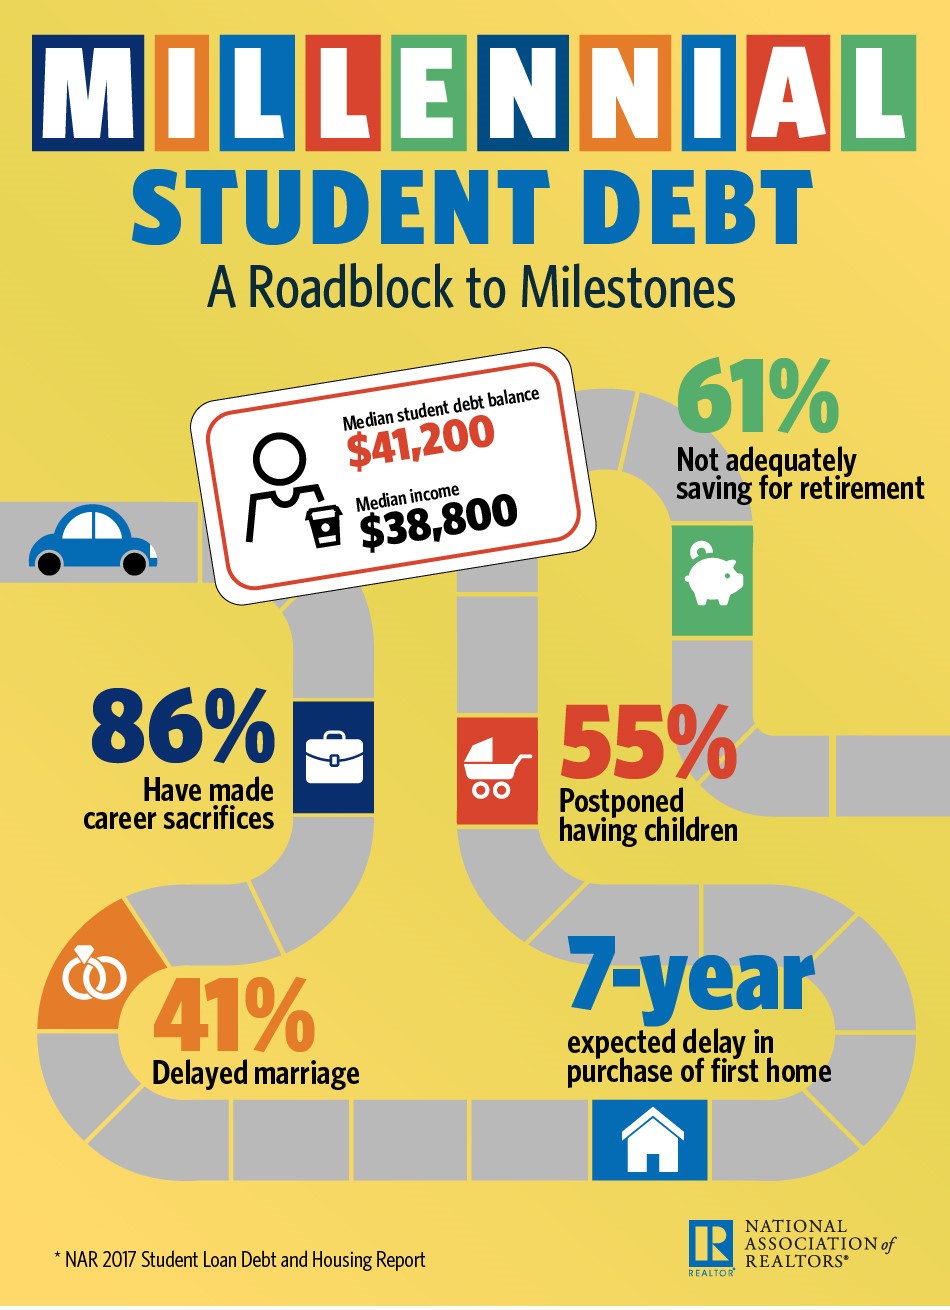 https://www.nar.realtor/reports/student-loan-debt-and-housing-report